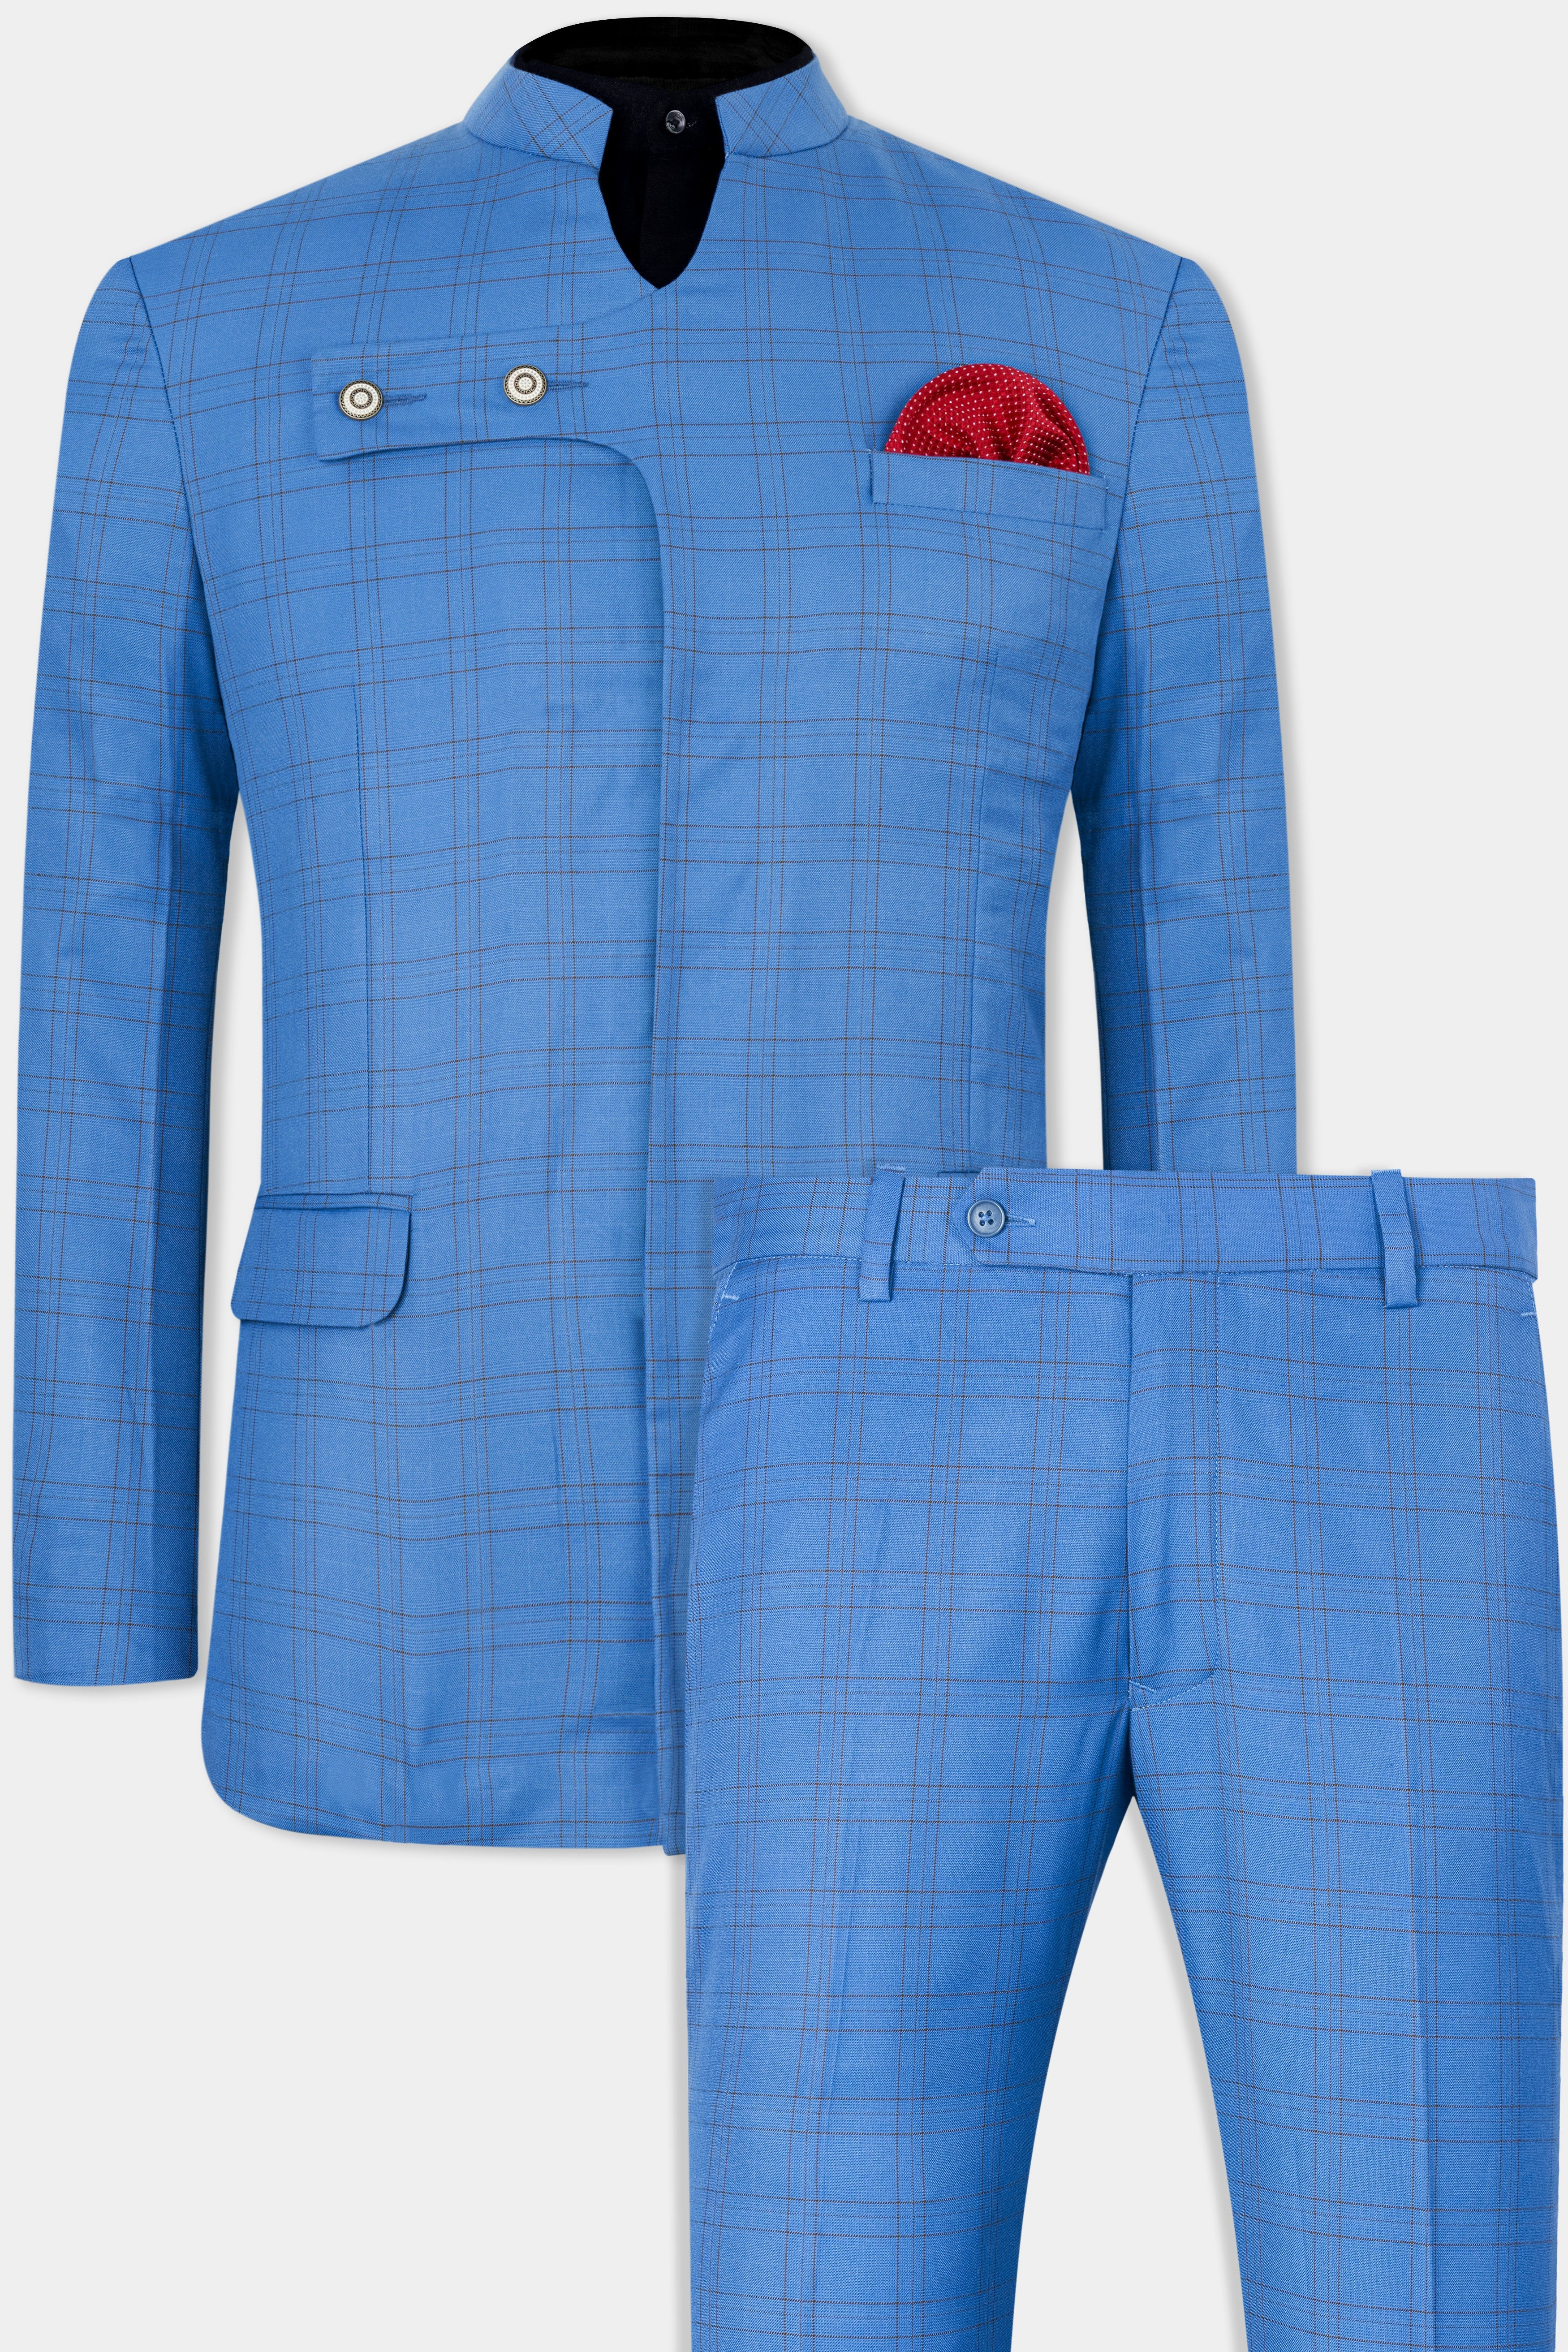 Tufts Blue and Taupe Brown Plaid Wool Rich Bandhgala Designer Suit ST2876-D434-36, ST2876-D434-38, ST2876-D434-40, ST2876-D434-42, ST2876-D434-44, ST2876-D434-46, ST2876-D434-48, ST2876-D434-50, ST2876-D434-52, ST2876-D434-54, ST2876-D434-56, ST2876-D434-58, ST2876-D434-60